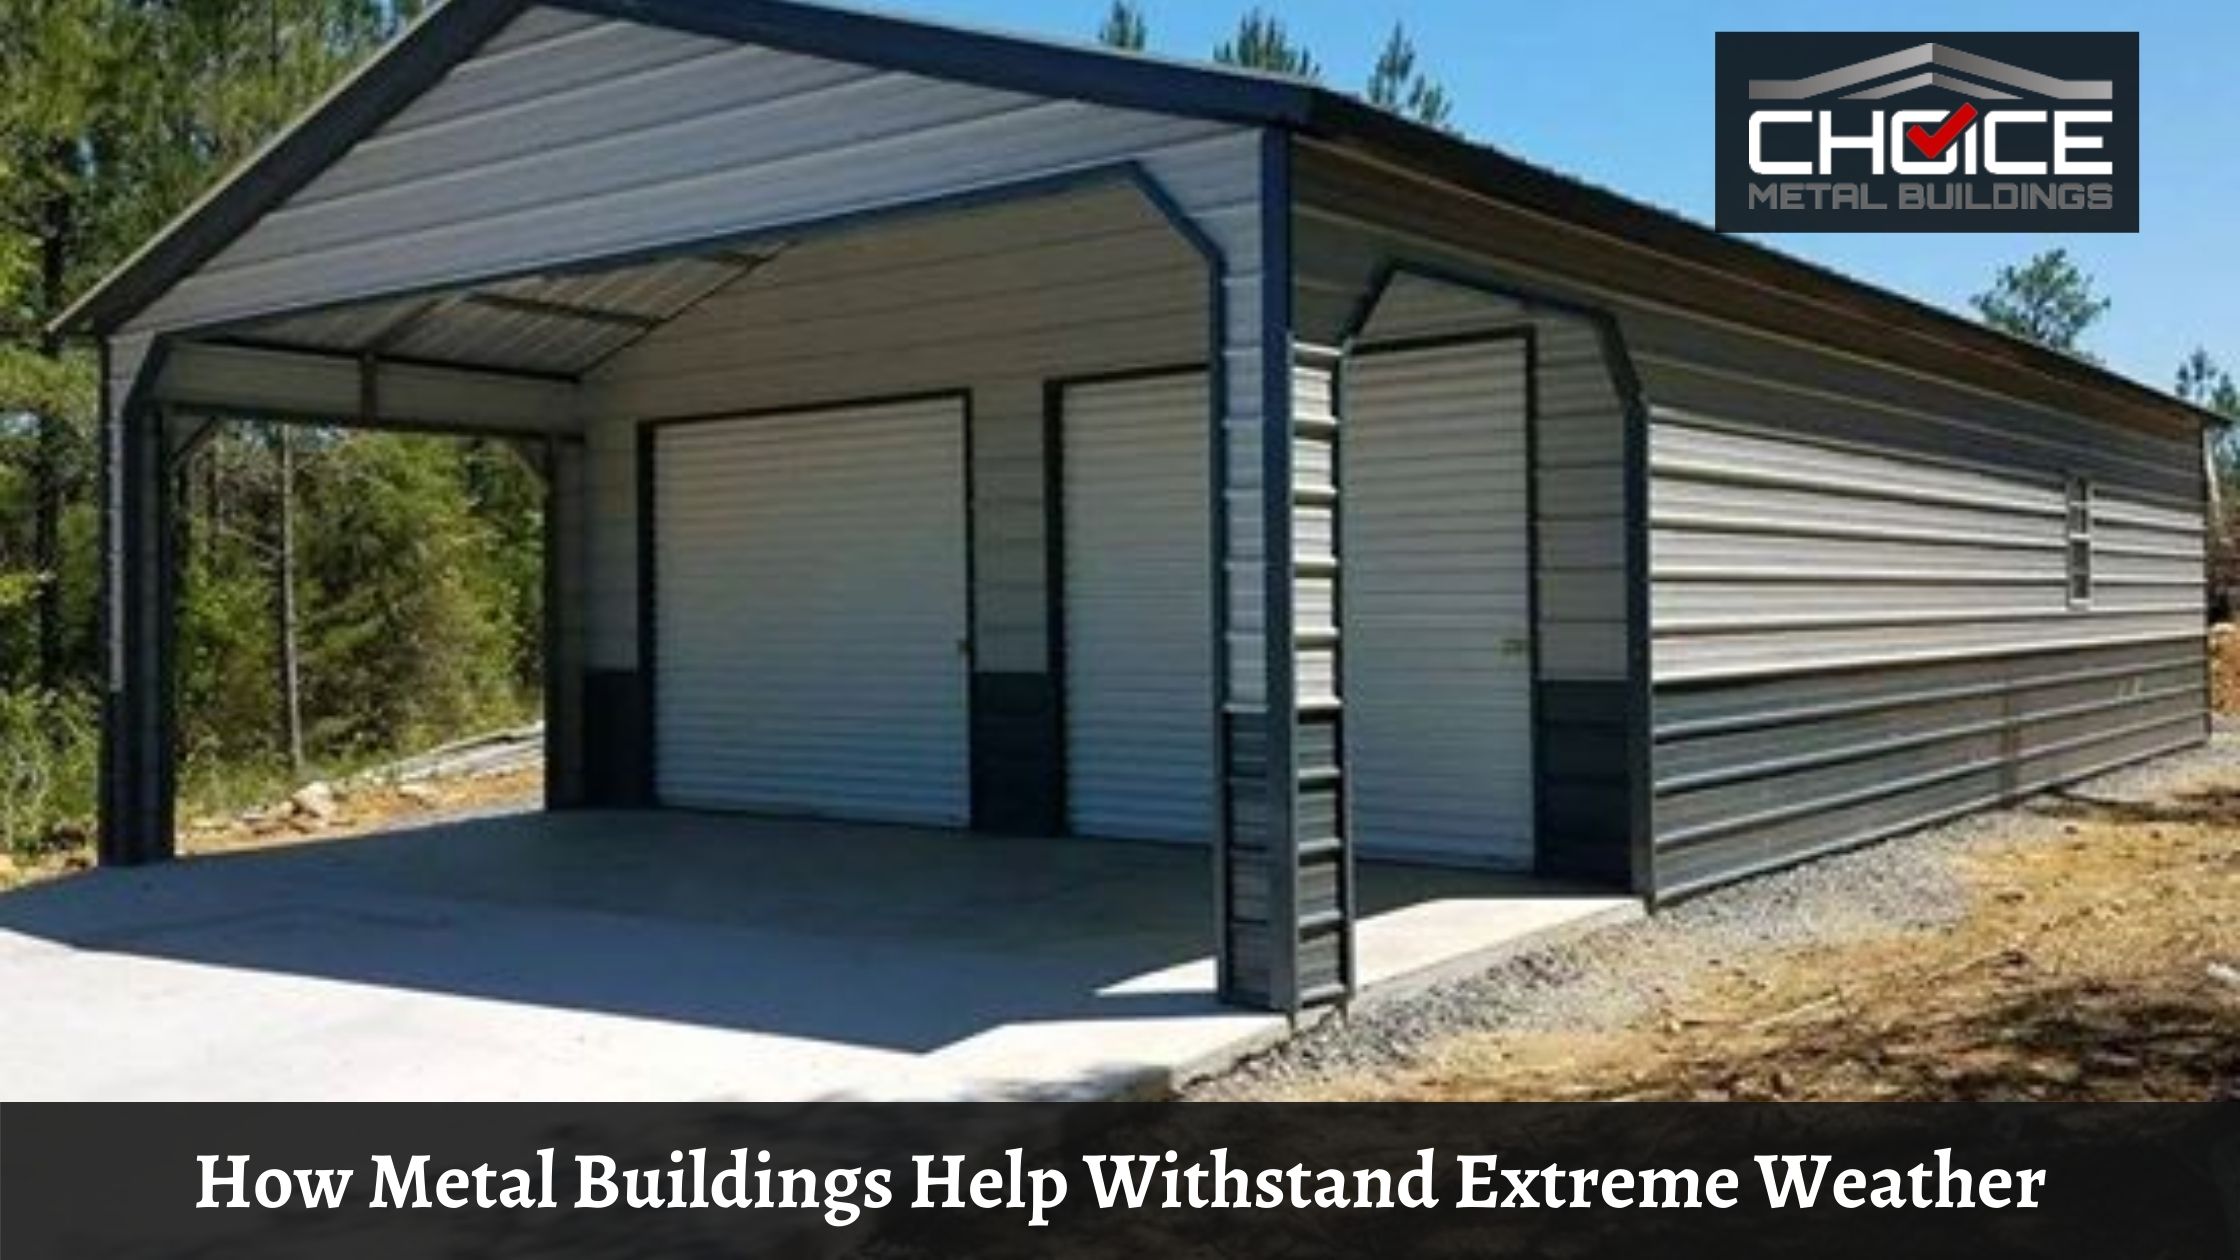 How Metal Buildings Help Withstand Extreme Weather